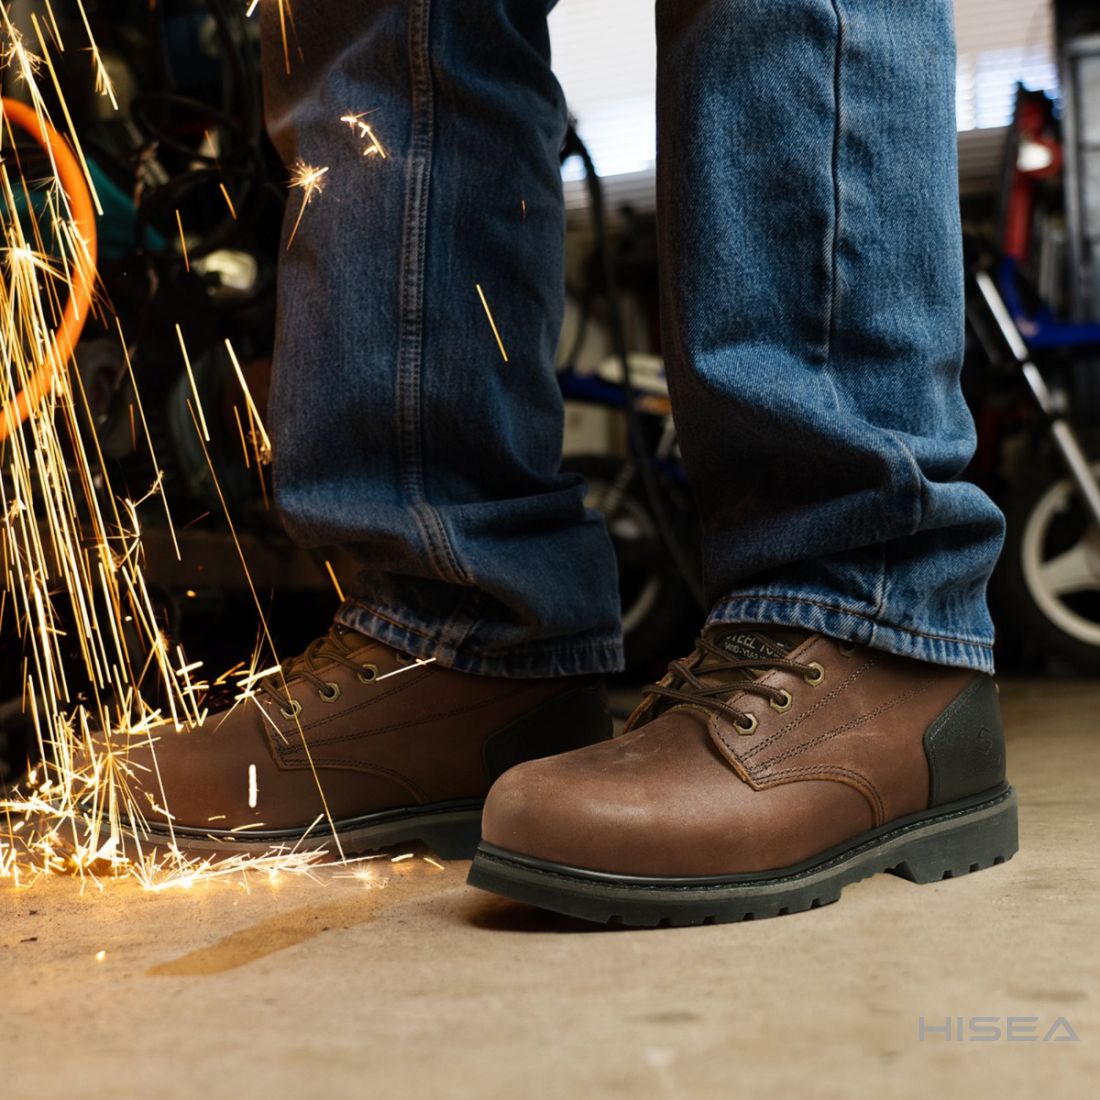 Men's Safety Working Boots